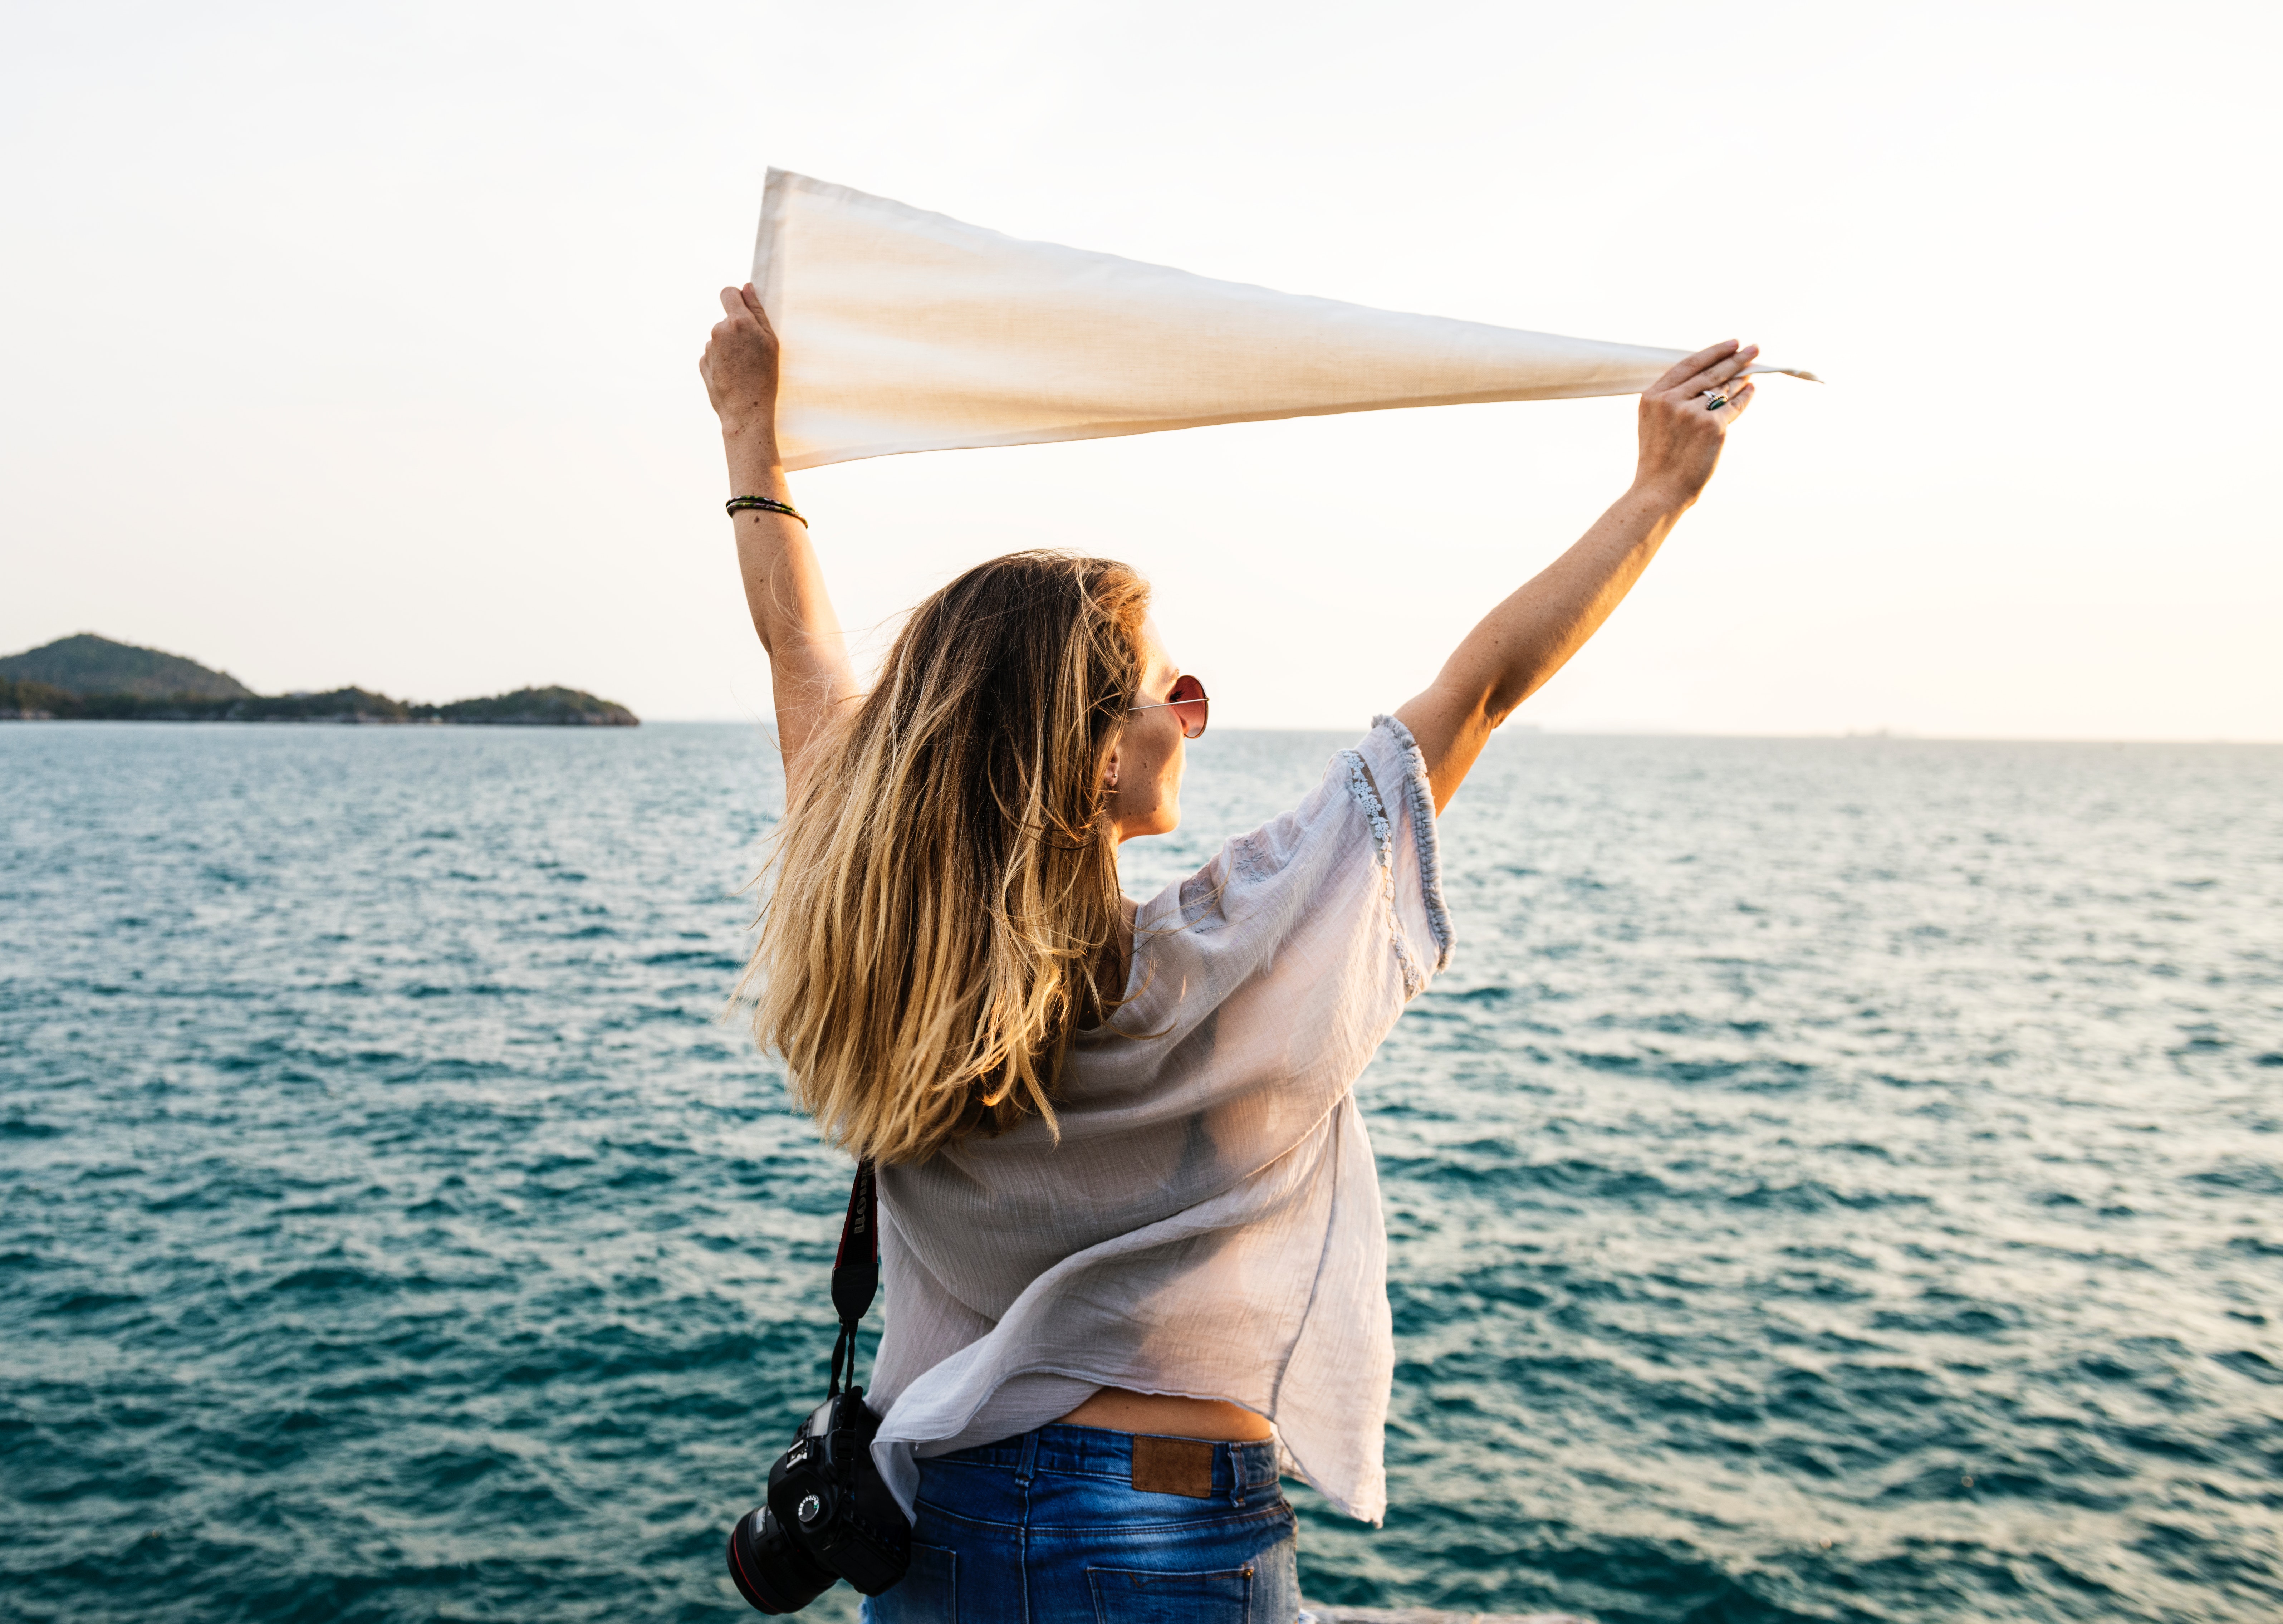 Photo of Woman Wearing White Top, Blue Bottoms and Black Dslr Camera Holding White Textile While Facing the Ocean, Adventure, Tour, Person, Recreation, HQ Photo